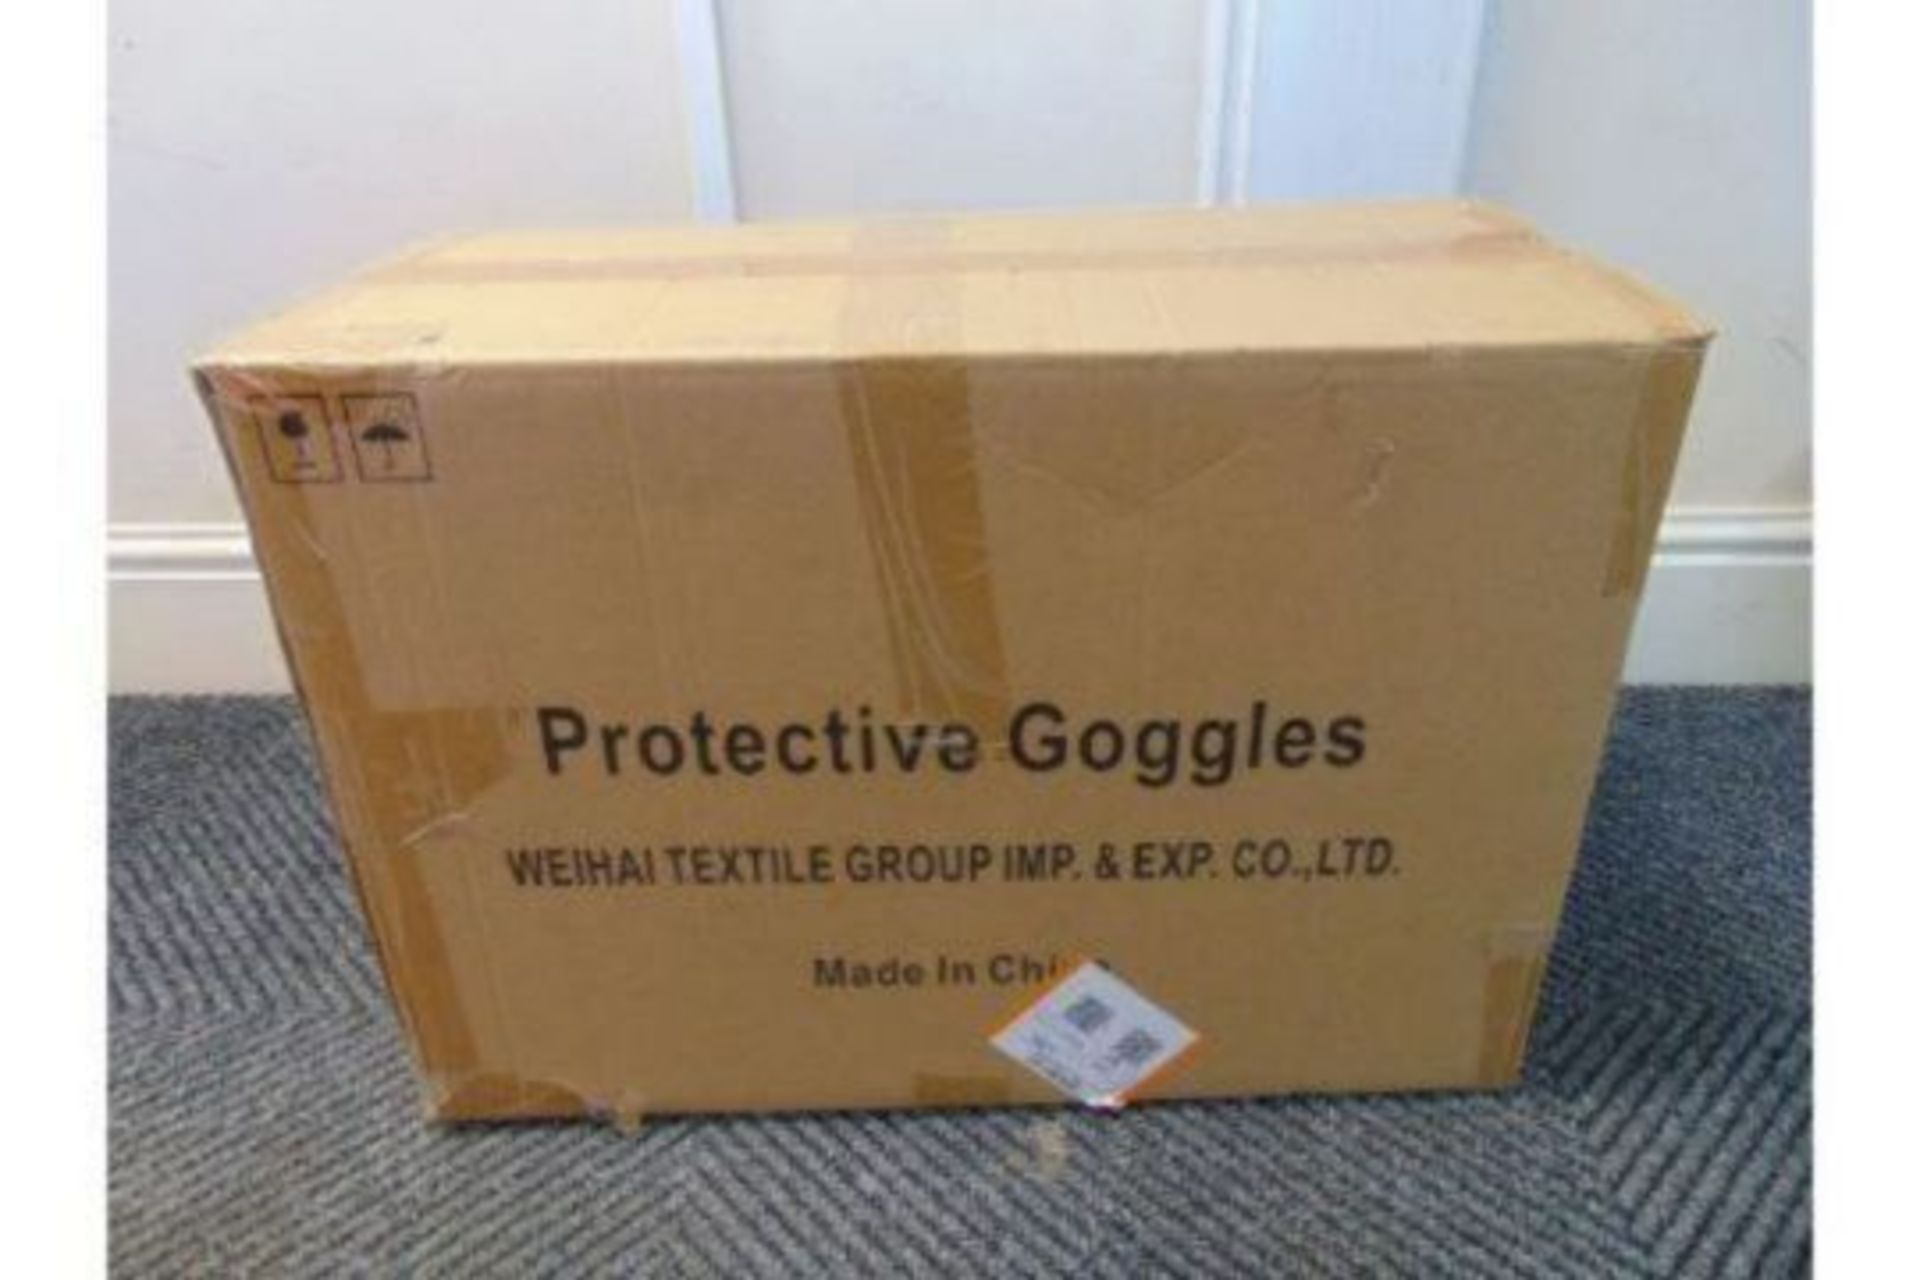 1440 Protective Goggles GLYZ1-1, 1 Pallet (18 Boxes, 80 per box) New Unissued Reserve Stock - Image 13 of 15